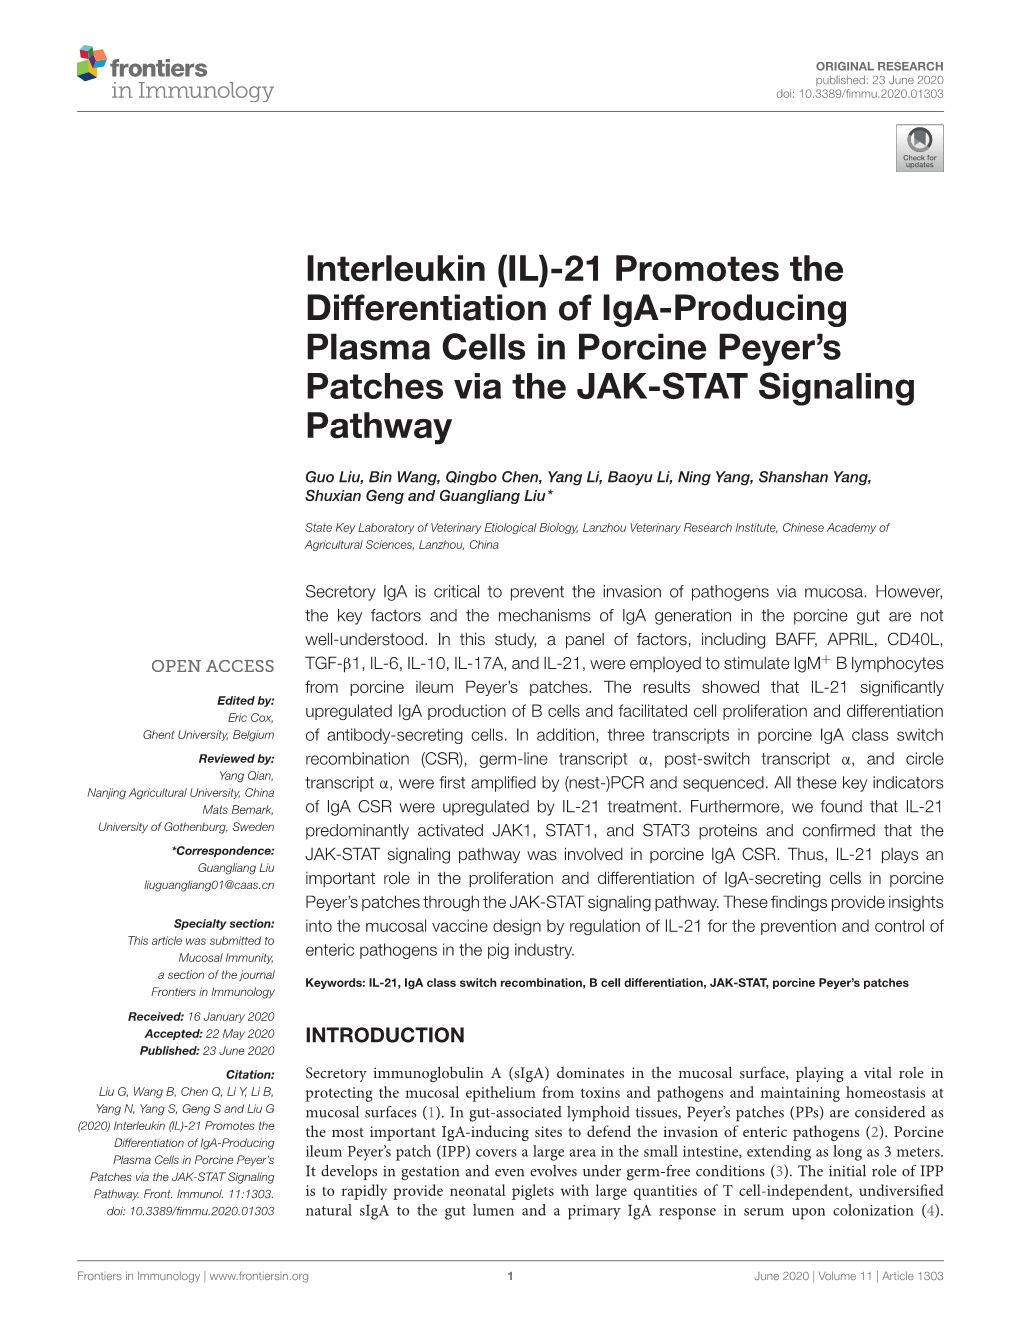 Interleukin (IL)-21 Promotes the Differentiation of Iga-Producing Plasma Cells in Porcine Peyer’S Patches Via the JAK-STAT Signaling Pathway